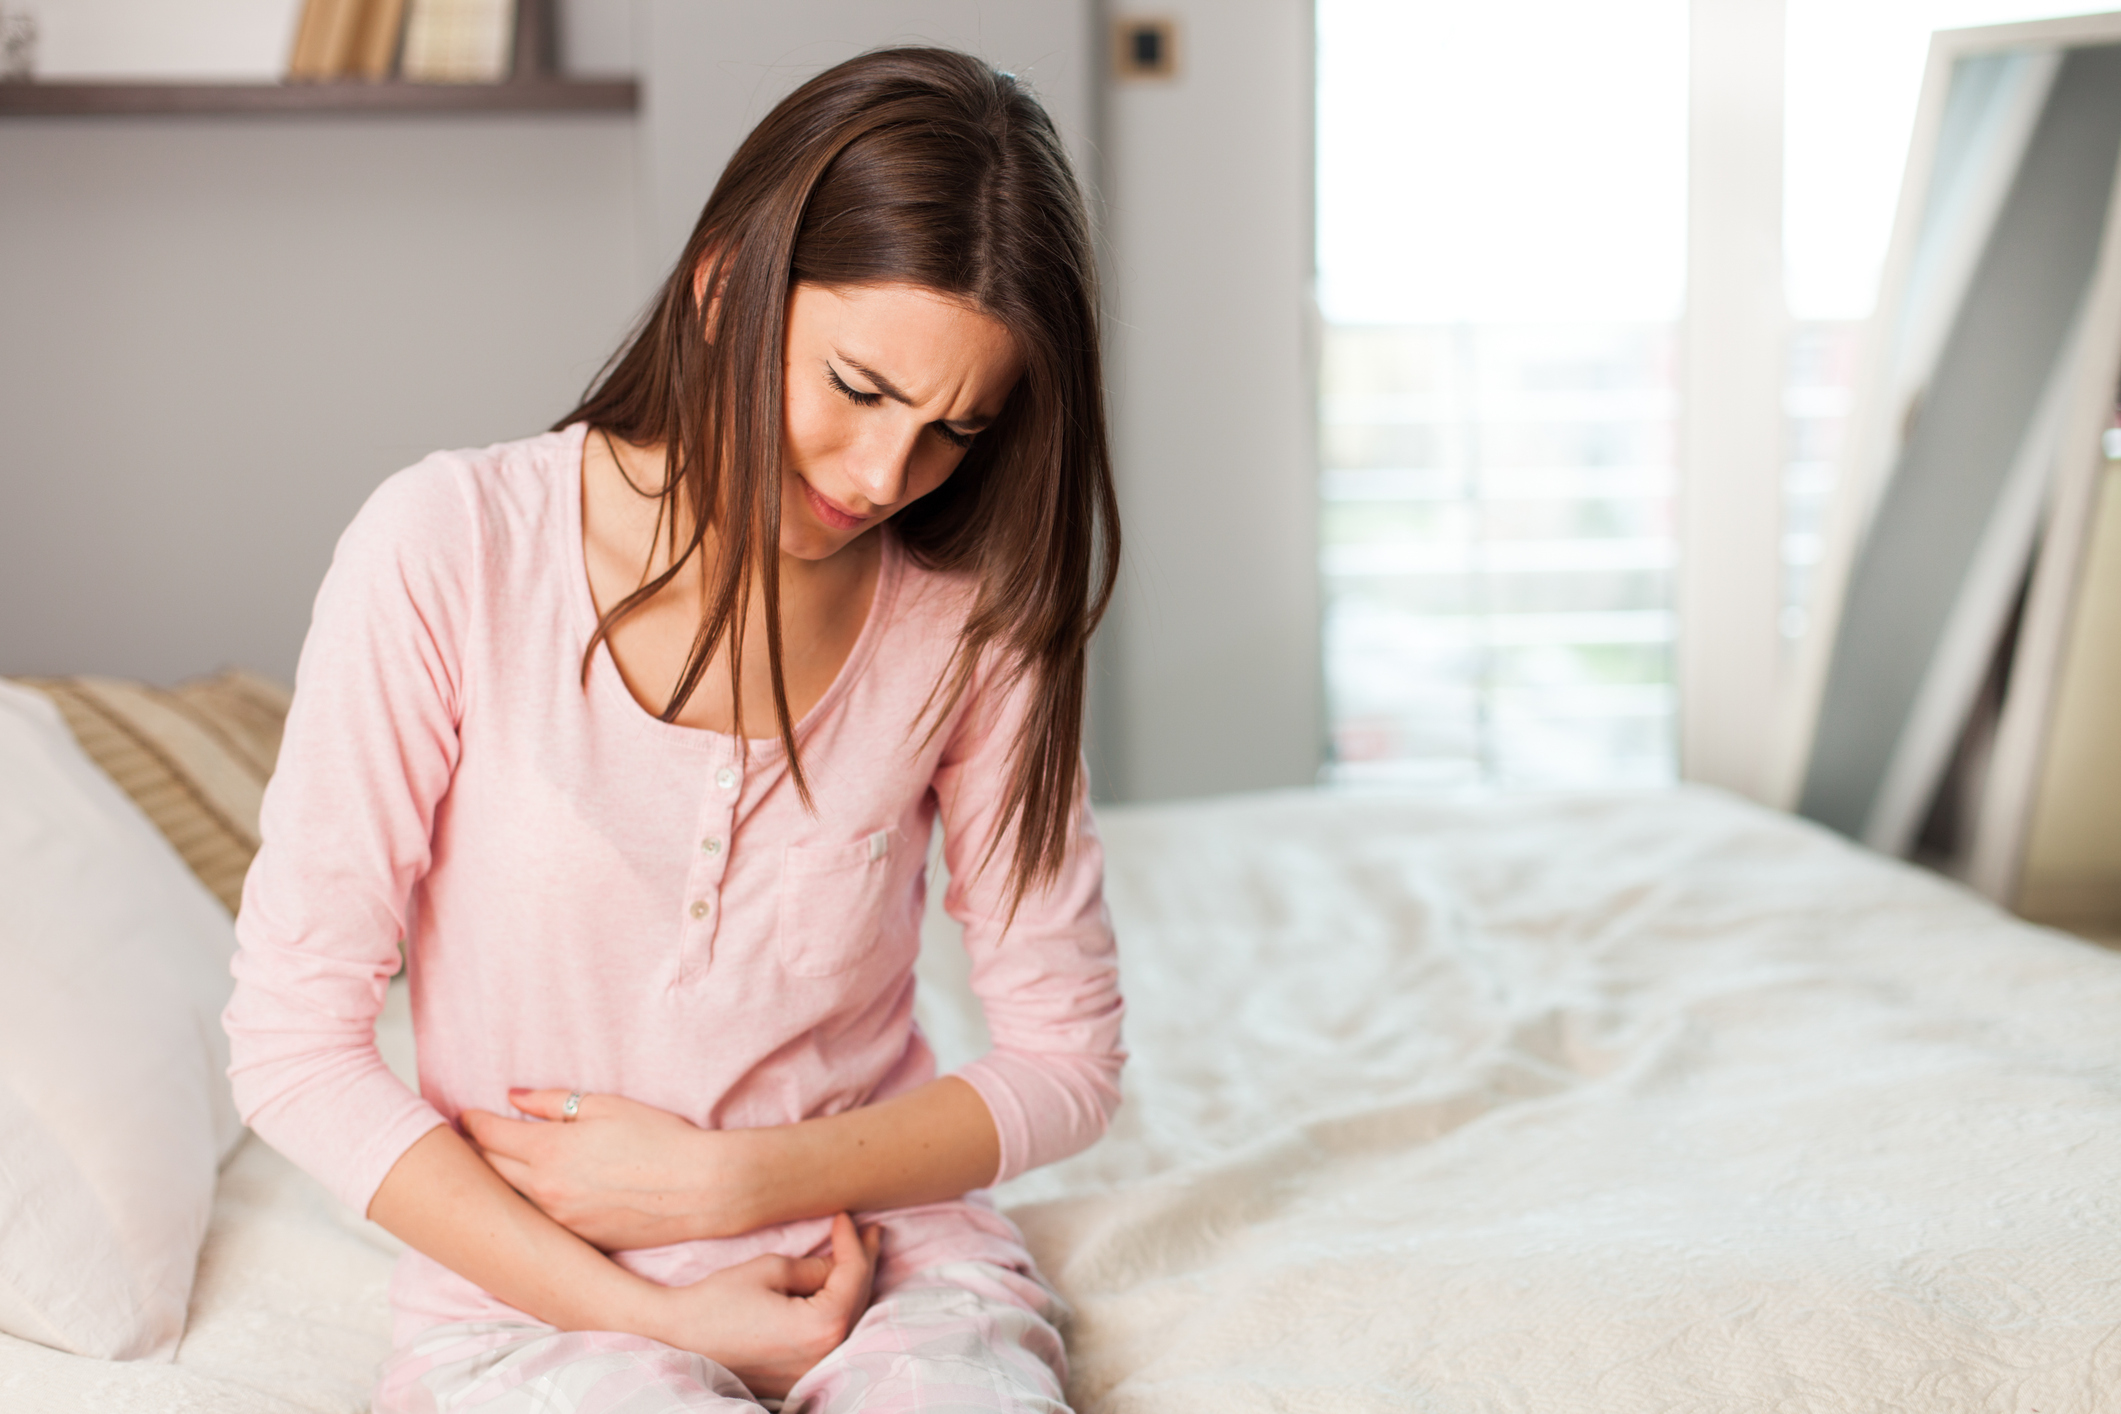 Young woman with a stomach ache in the bedroom, sitting holding her abdomen